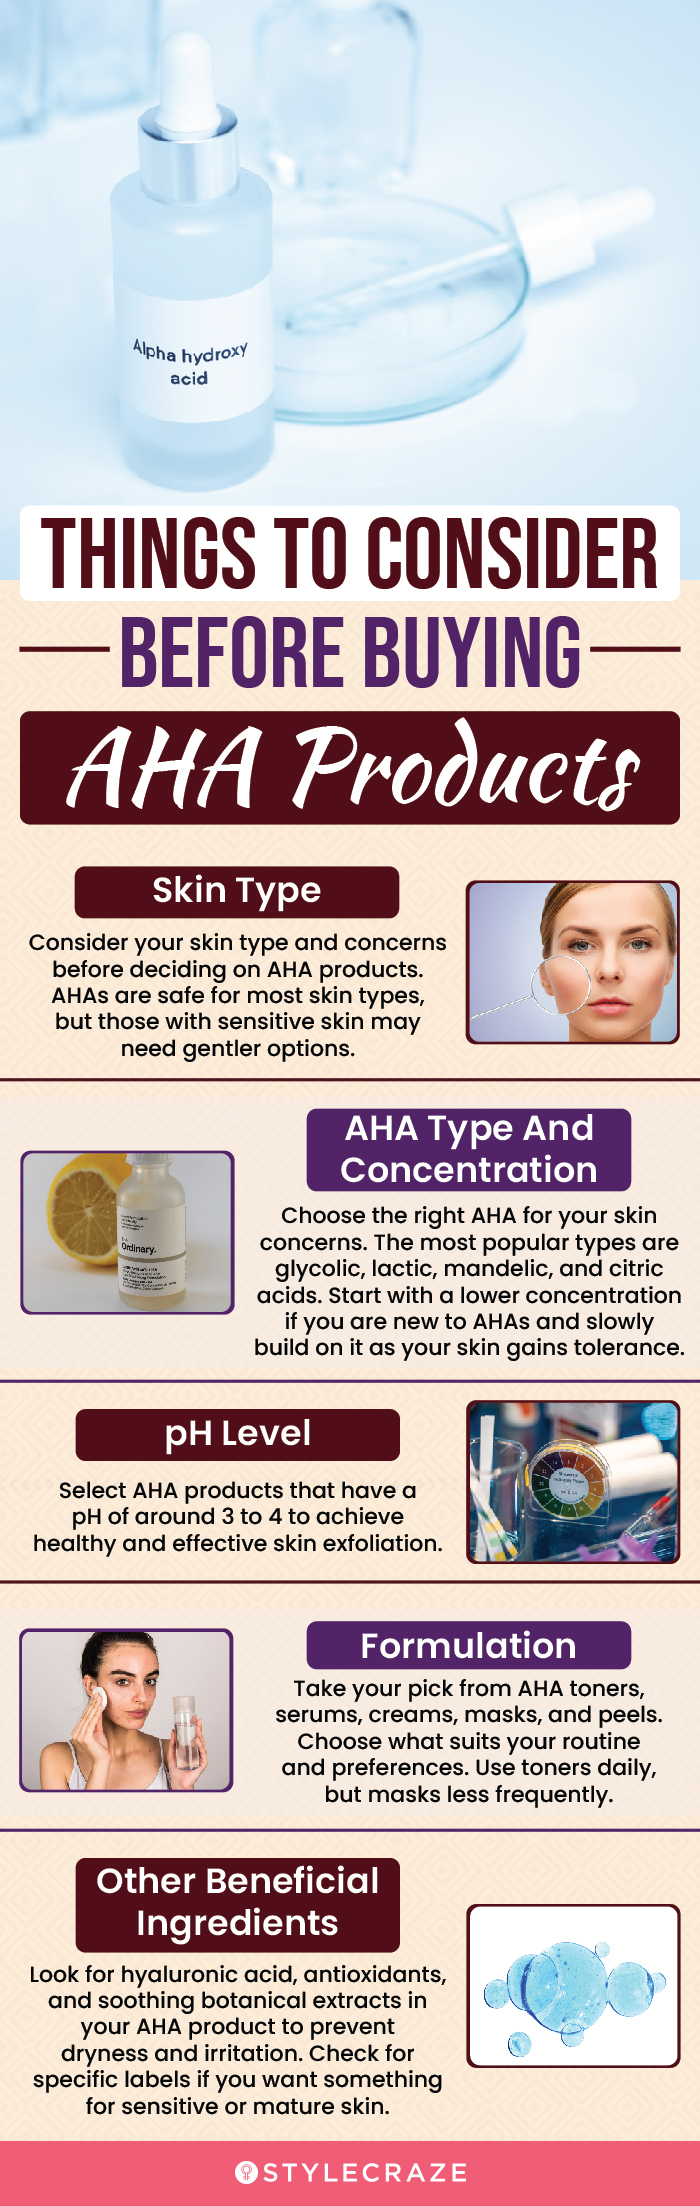 Things To Consider Before Buying AHA Products (infographic)